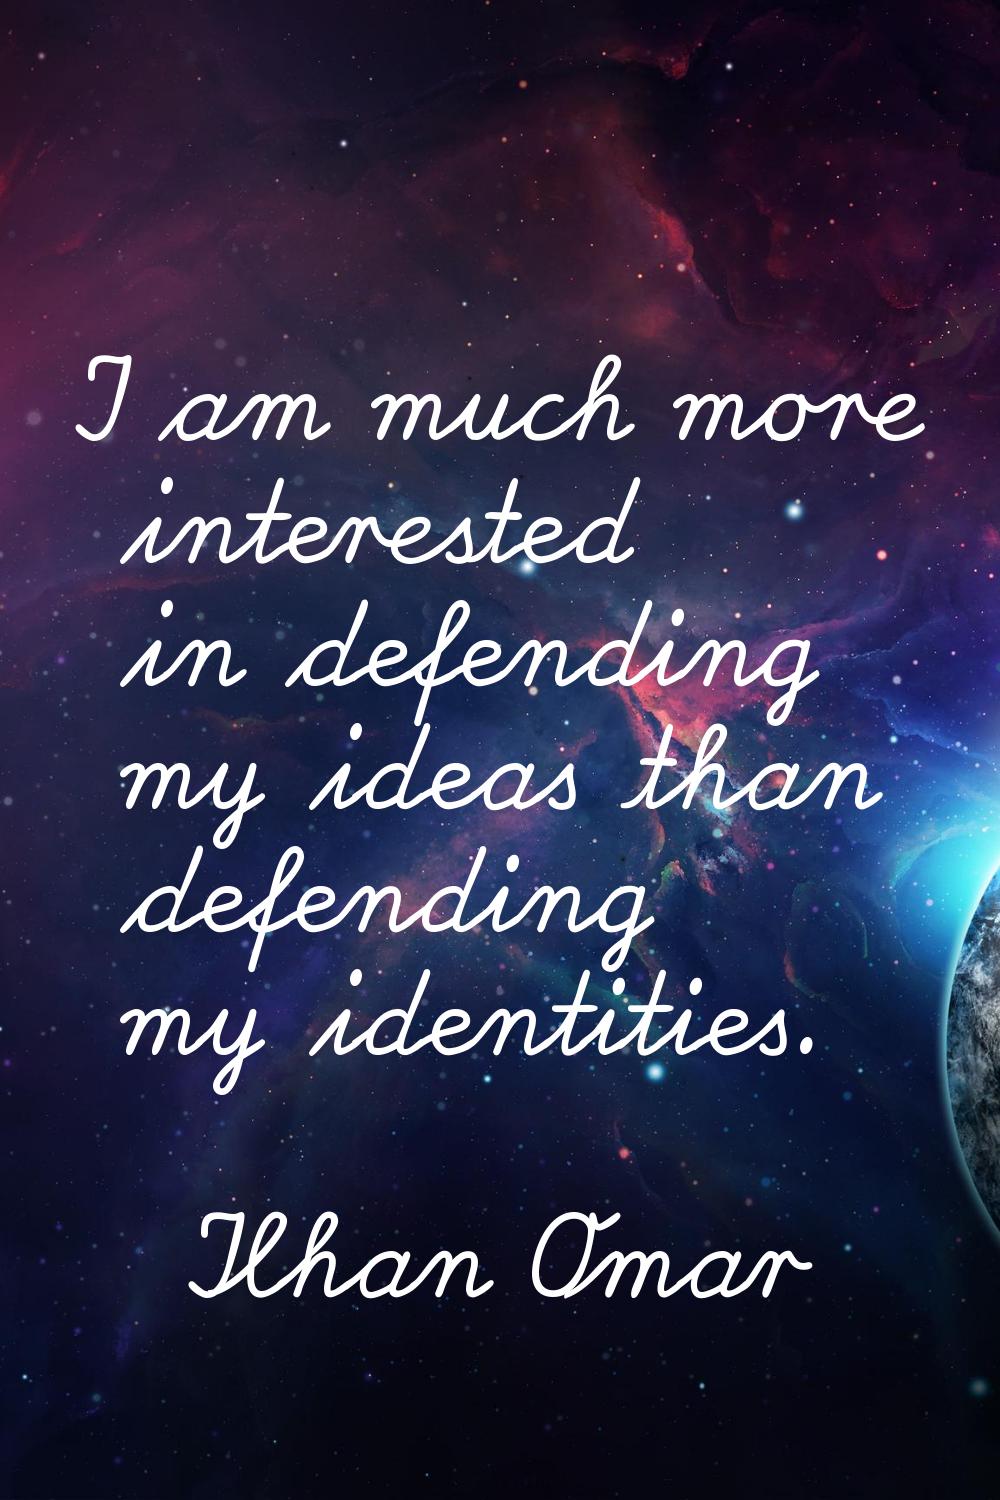 I am much more interested in defending my ideas than defending my identities.